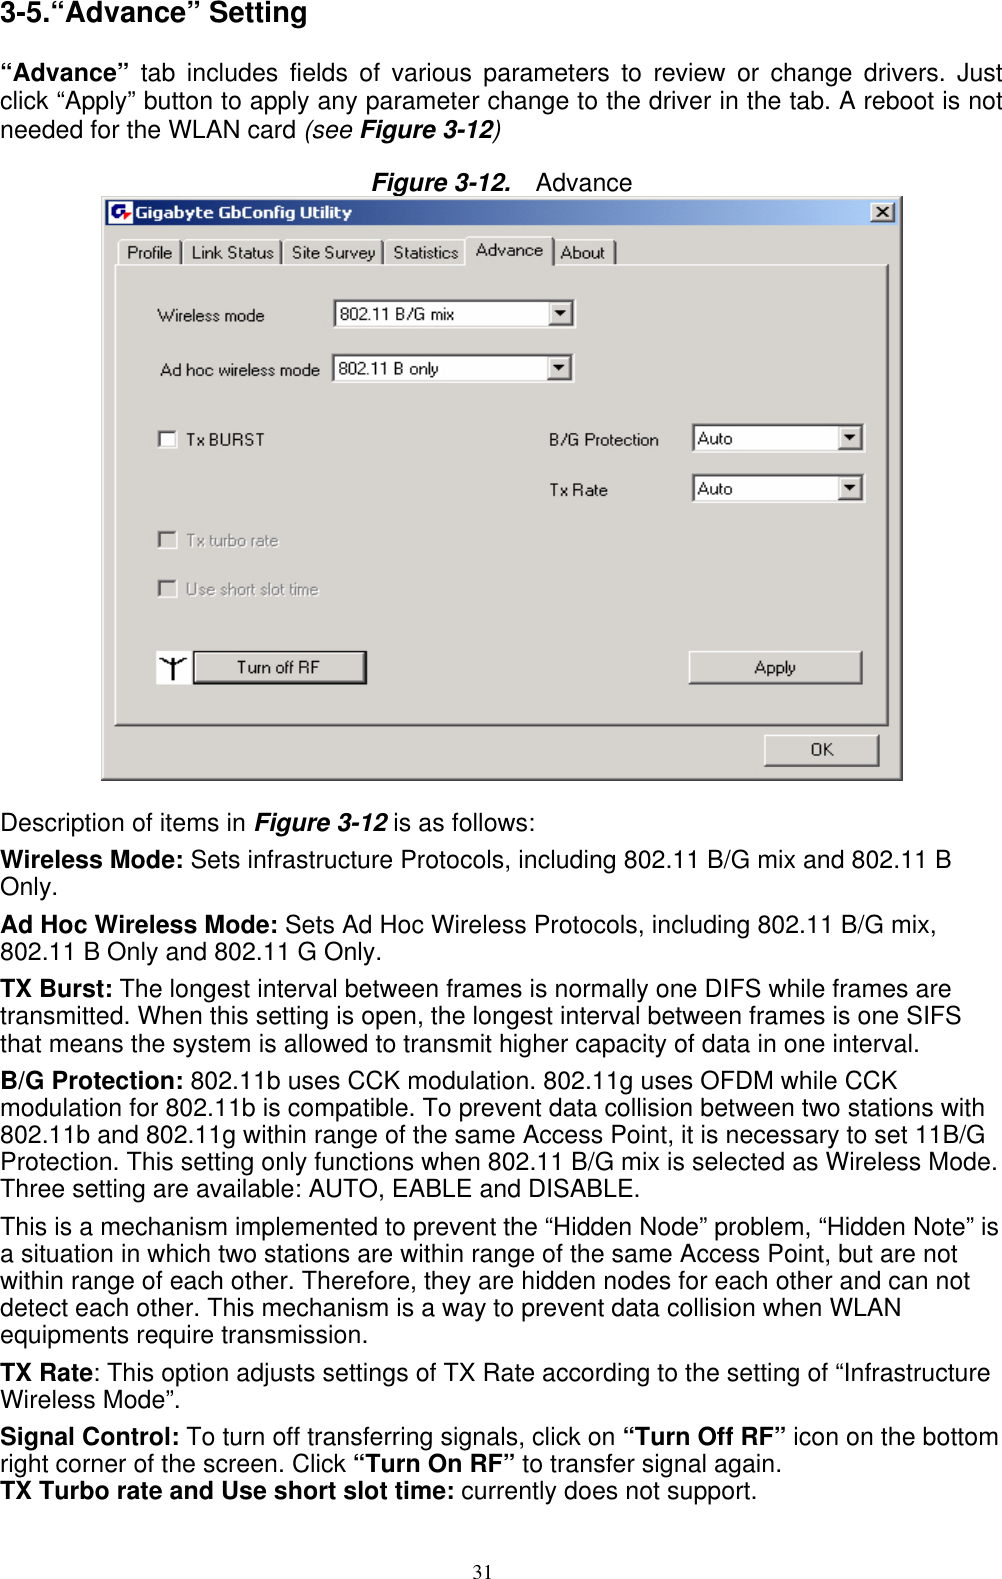 31   3-5.“Advance” Setting  “Advance” tab includes fields of various parameters to review or change drivers. Just click “Apply” button to apply any parameter change to the driver in the tab. A reboot is not needed for the WLAN card (see Figure 3-12)  Figure 3-12.   Advance   Description of items in Figure 3-12 is as follows: Wireless Mode: Sets infrastructure Protocols, including 802.11 B/G mix and 802.11 B Only. Ad Hoc Wireless Mode: Sets Ad Hoc Wireless Protocols, including 802.11 B/G mix, 802.11 B Only and 802.11 G Only. TX Burst: The longest interval between frames is normally one DIFS while frames are transmitted. When this setting is open, the longest interval between frames is one SIFS that means the system is allowed to transmit higher capacity of data in one interval. B/G Protection: 802.11b uses CCK modulation. 802.11g uses OFDM while CCK modulation for 802.11b is compatible. To prevent data collision between two stations with 802.11b and 802.11g within range of the same Access Point, it is necessary to set 11B/G Protection. This setting only functions when 802.11 B/G mix is selected as Wireless Mode. Three setting are available: AUTO, EABLE and DISABLE. This is a mechanism implemented to prevent the “Hidden Node” problem, “Hidden Note” is a situation in which two stations are within range of the same Access Point, but are not within range of each other. Therefore, they are hidden nodes for each other and can not detect each other. This mechanism is a way to prevent data collision when WLAN equipments require transmission. TX Rate: This option adjusts settings of TX Rate according to the setting of “Infrastructure Wireless Mode”. Signal Control: To turn off transferring signals, click on “Turn Off RF” icon on the bottom right corner of the screen. Click “Turn On RF” to transfer signal again. TX Turbo rate and Use short slot time: currently does not support. 